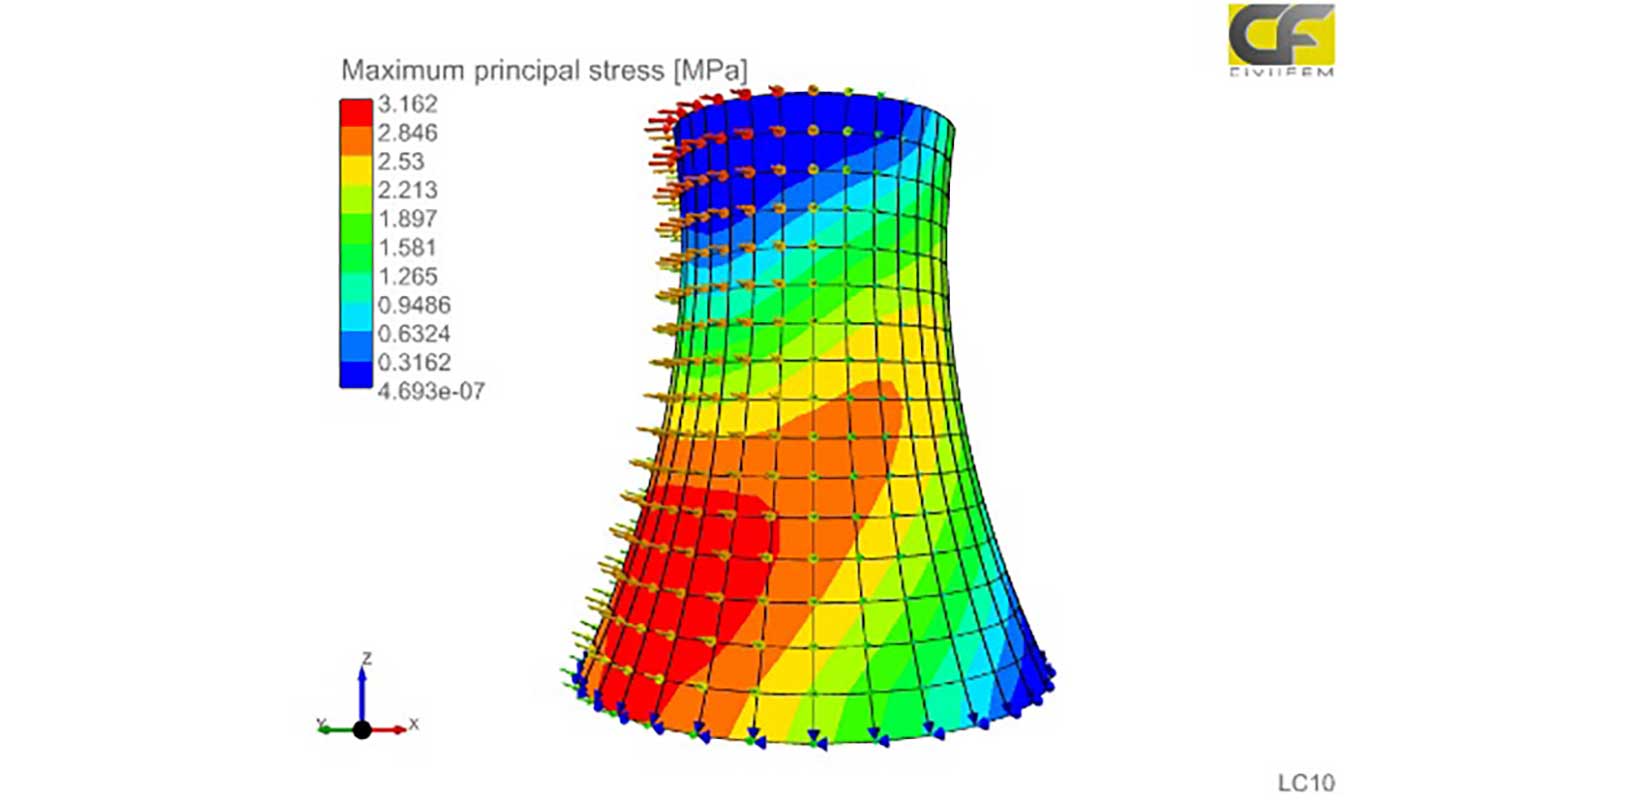 Multiphysics simulation for structural analysis of nuclear power plants using CivilFEM, powered by Marc